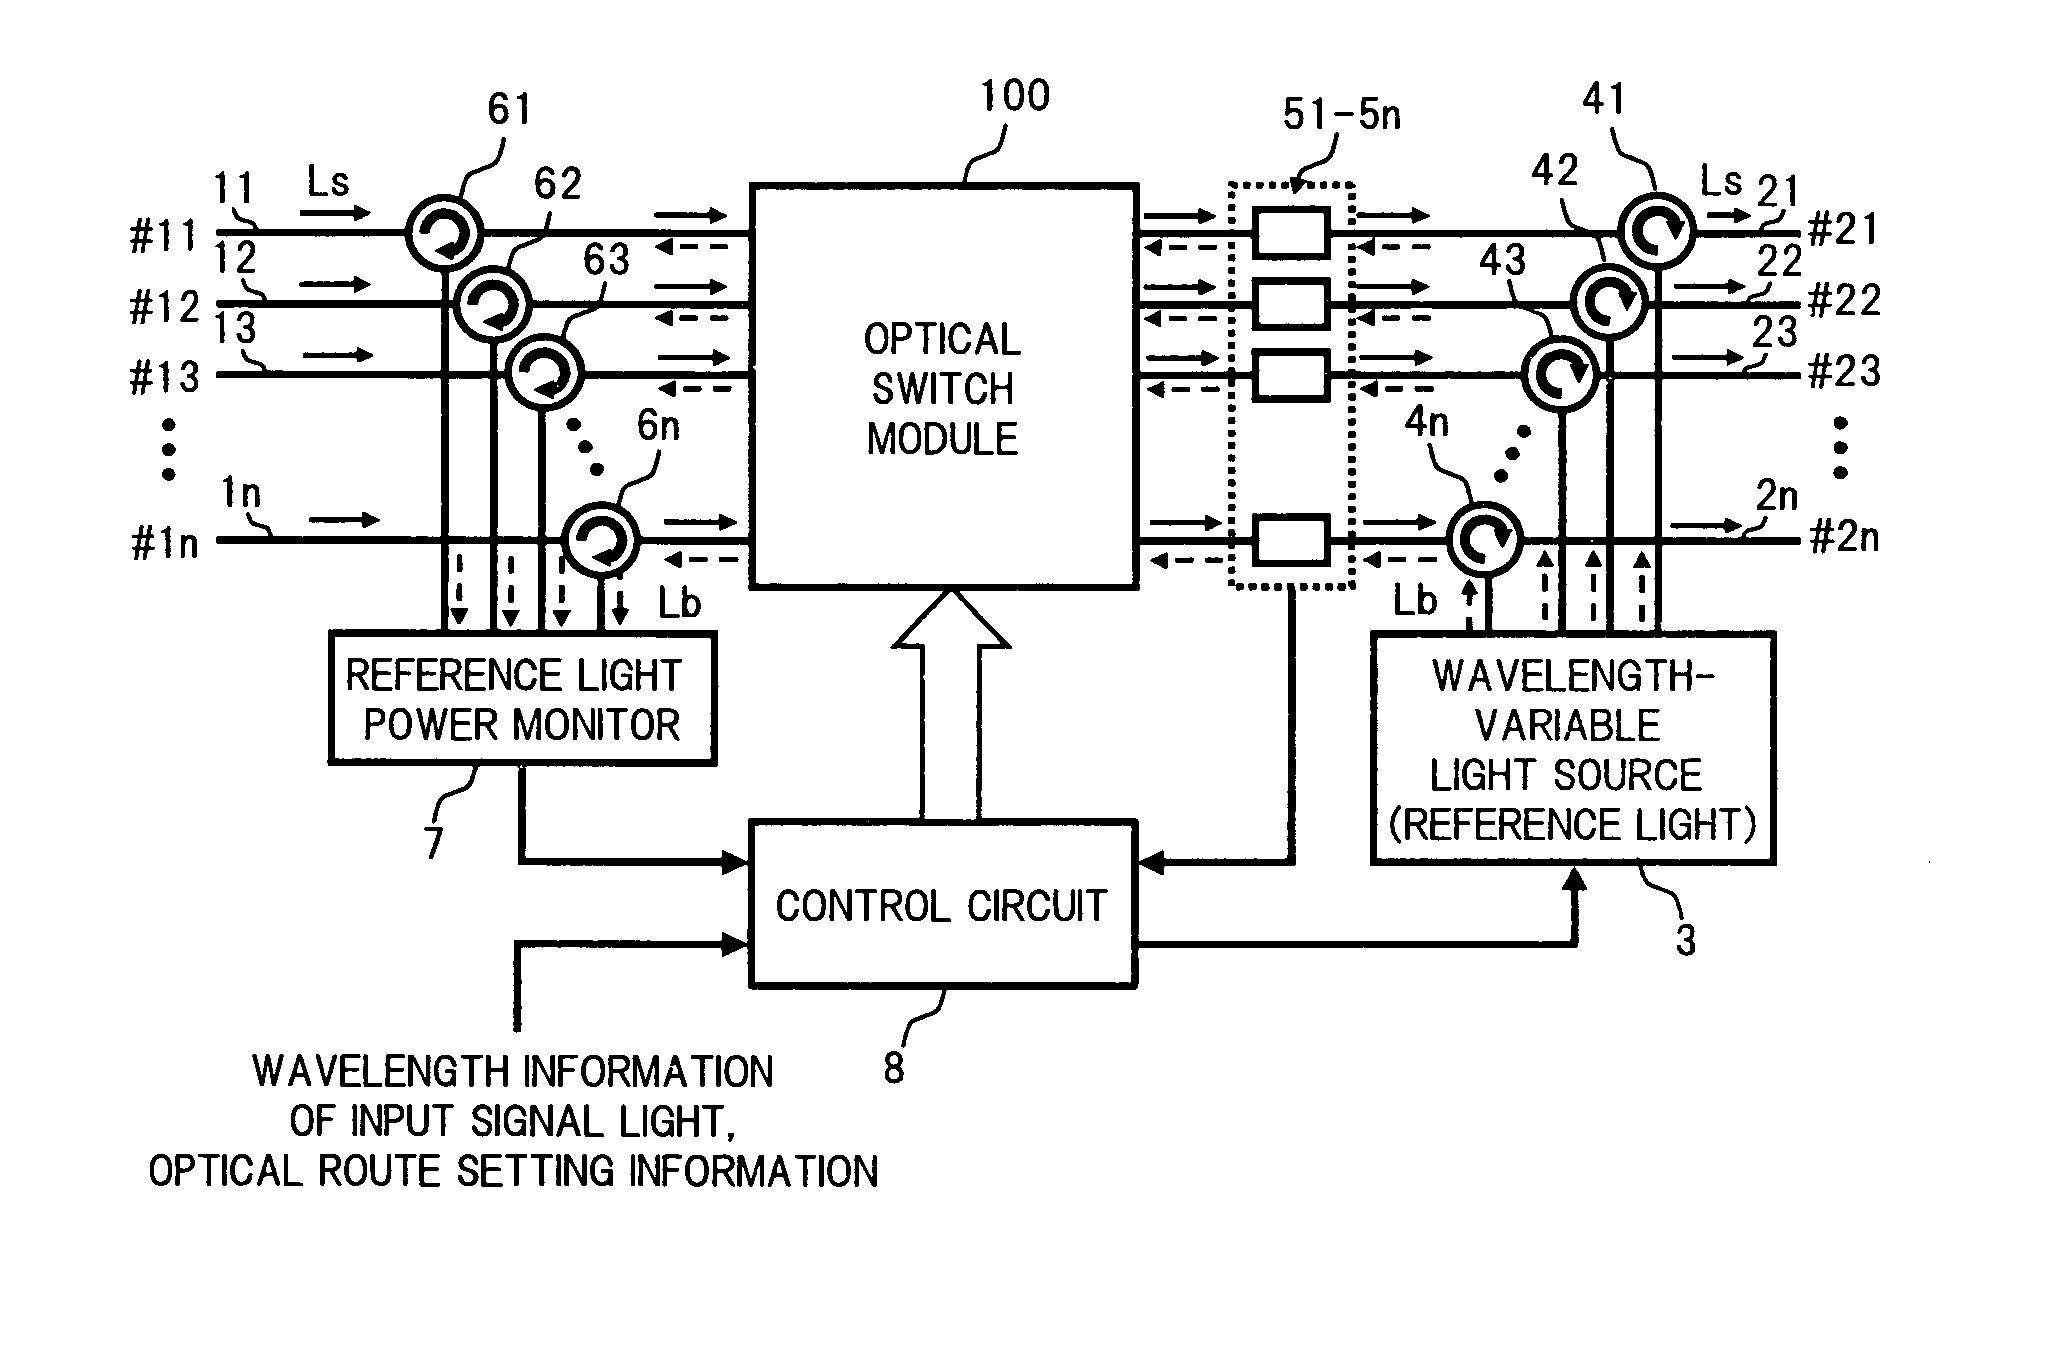 Optical switching device